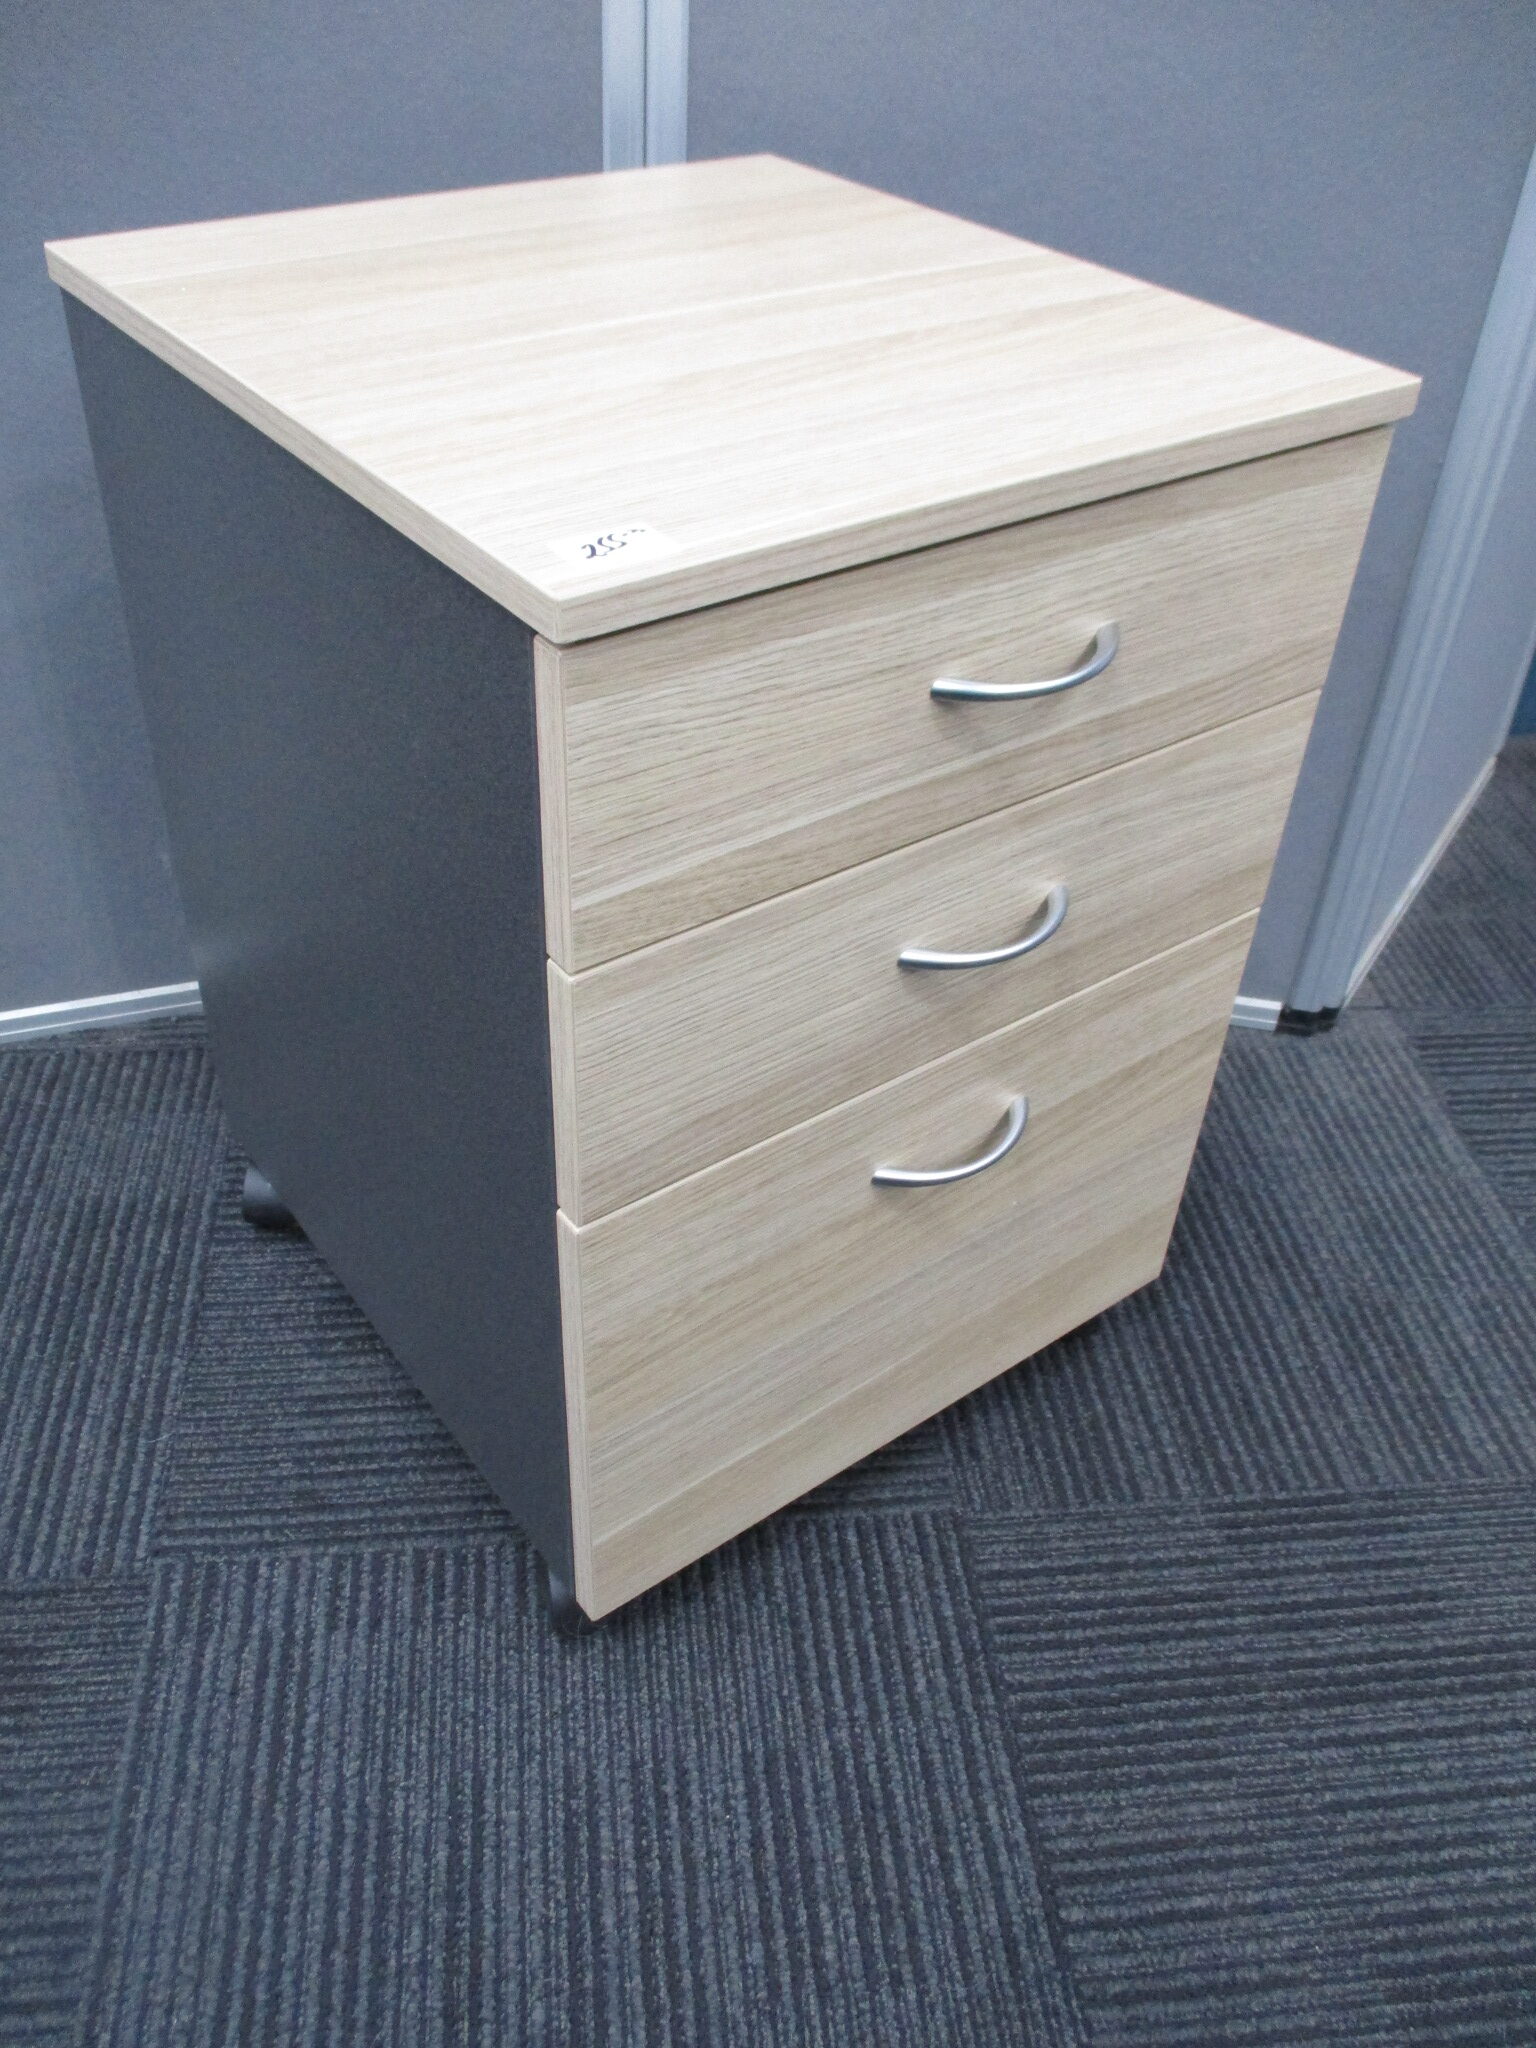 New Natural Oak and Ironstone 3 Drawer Mobile Pedestals $295